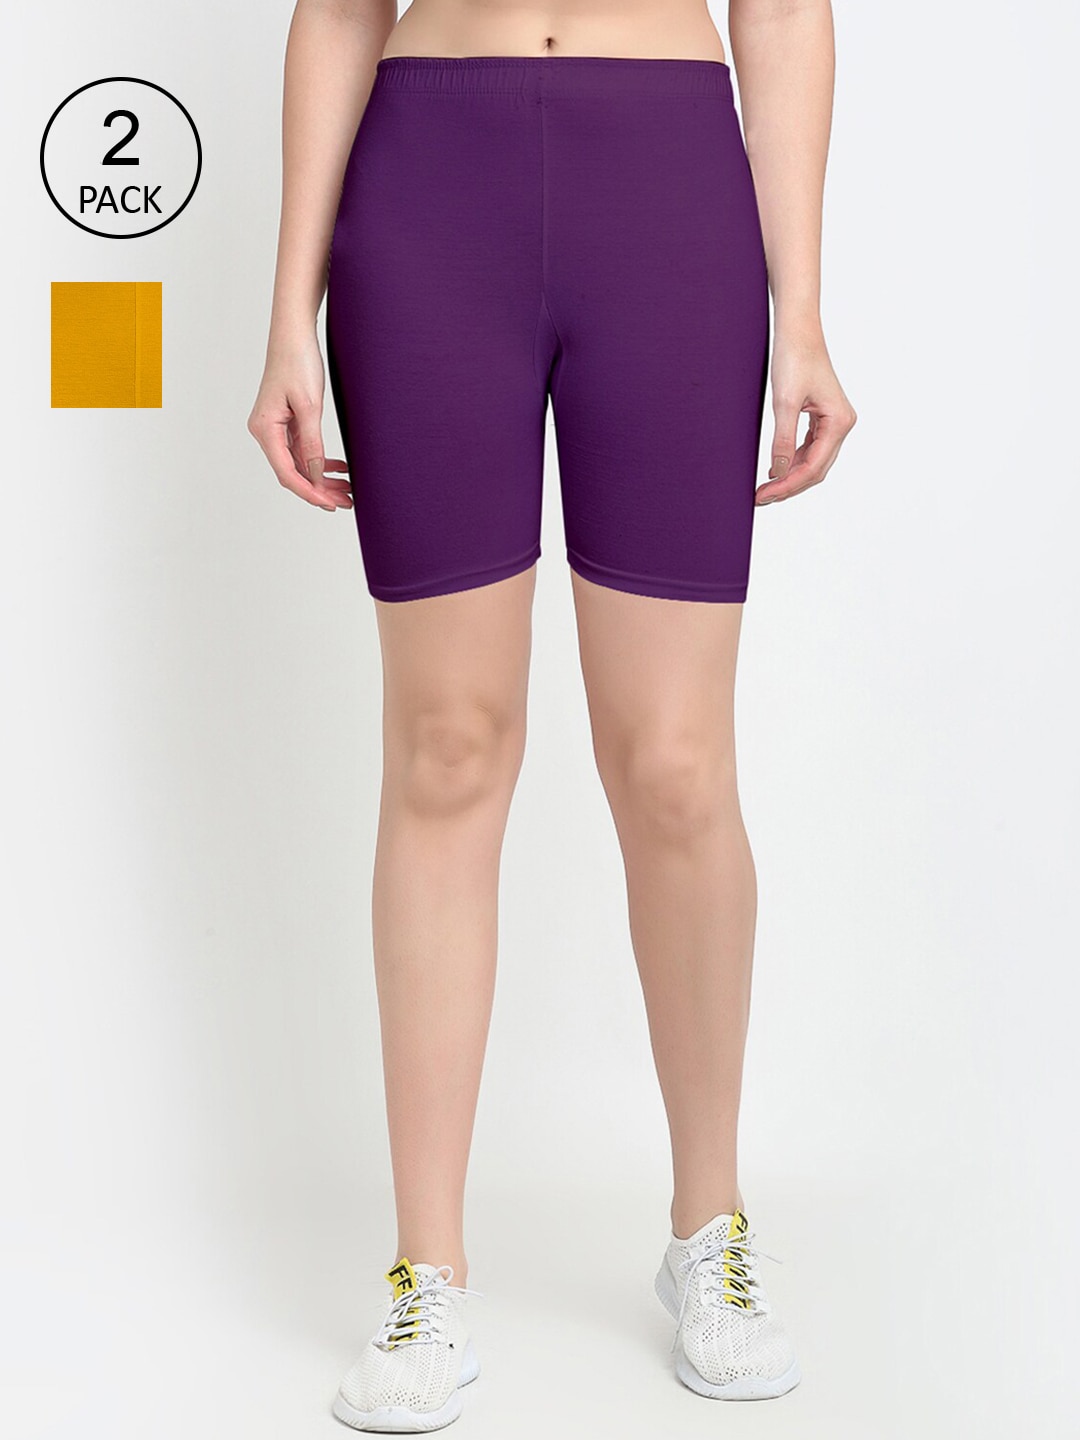 GRACIT Women Purple Cycling Cotton Sports Shorts Price in India